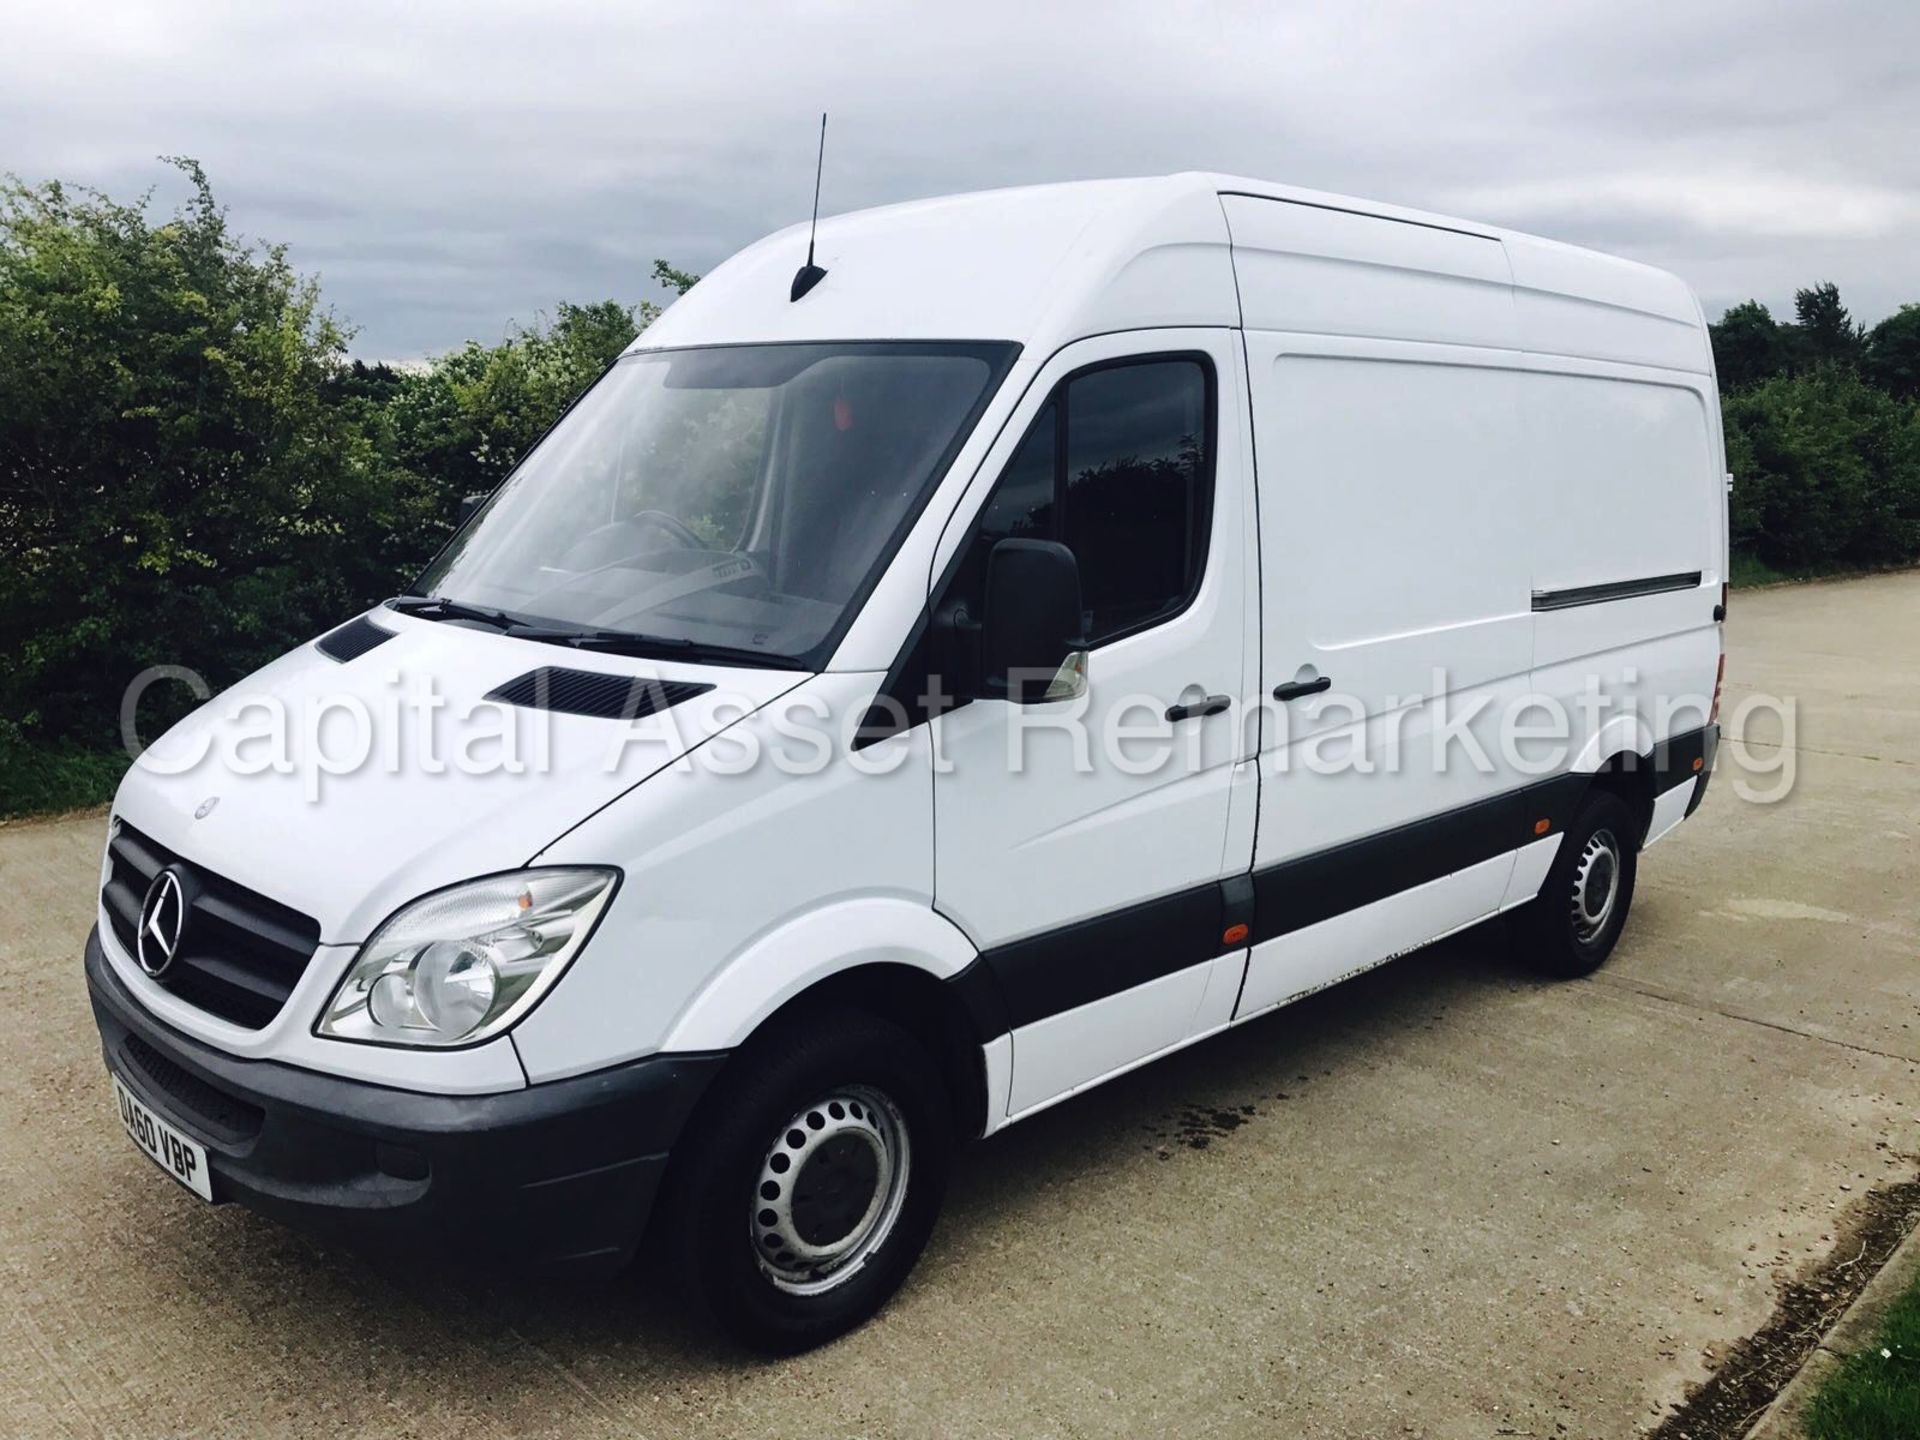 MERCEDES-BENZ SPRINTER 313 CDI 'MWB HI-ROOF' (2011) '130 BHP' (1 FOMRER COMPANY OWNER FROM NEW) - Image 3 of 13